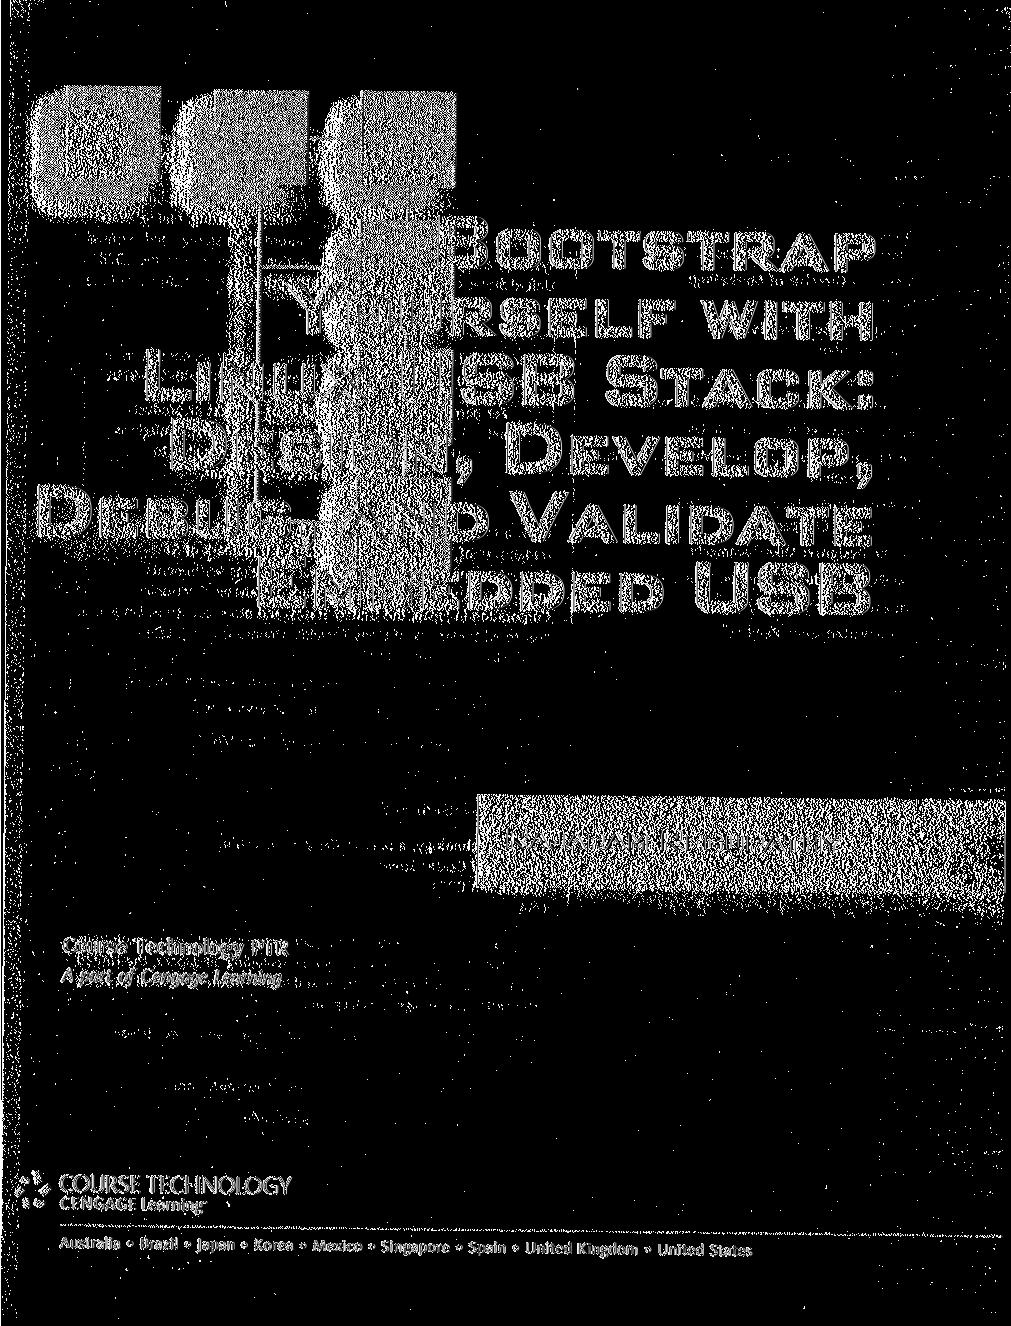 BOOTSTRAP YOURSELF WITH LINUX-USB STACK: DESIGN, DEVELOP, DEBUG, AND VALIDATE EMBEDDED USB RAJARAM REGUPATHY Course Technology PTR A part of